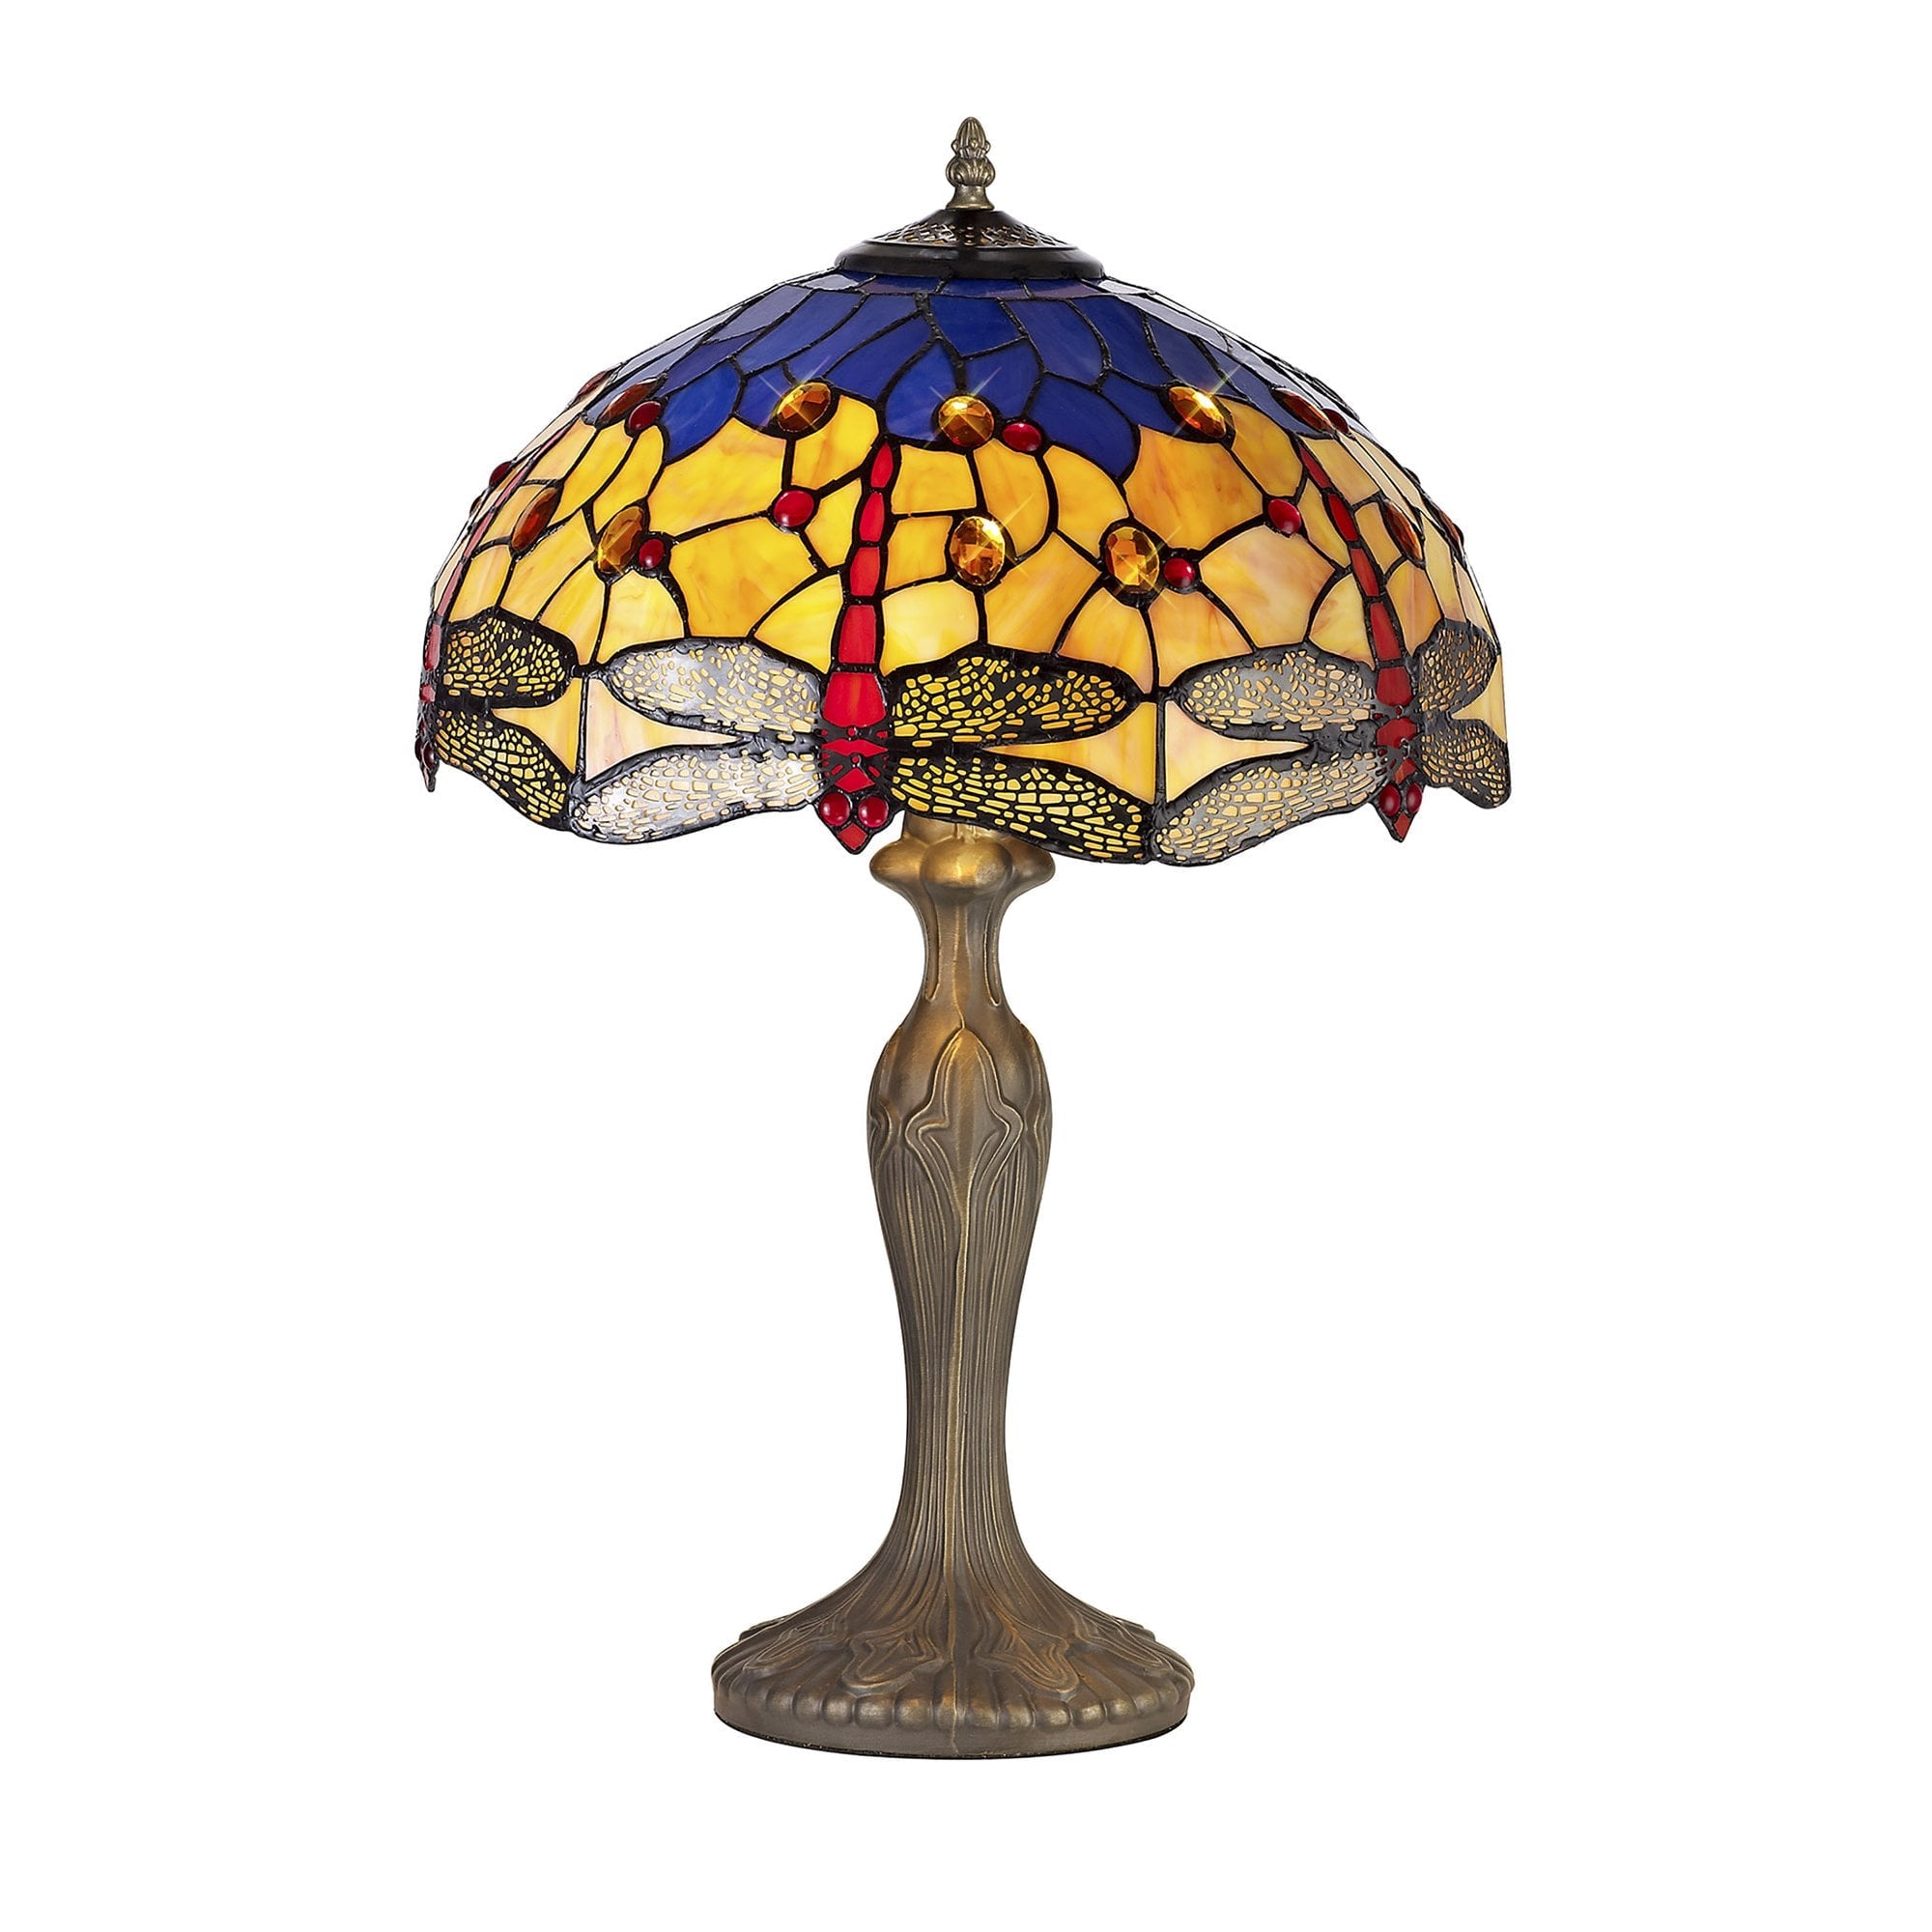 Hifly 2 Light Curved Table Lamp E27 With 40cm Tiffany Shade, Blue/Orange/Crystal/Aged Antique Brass